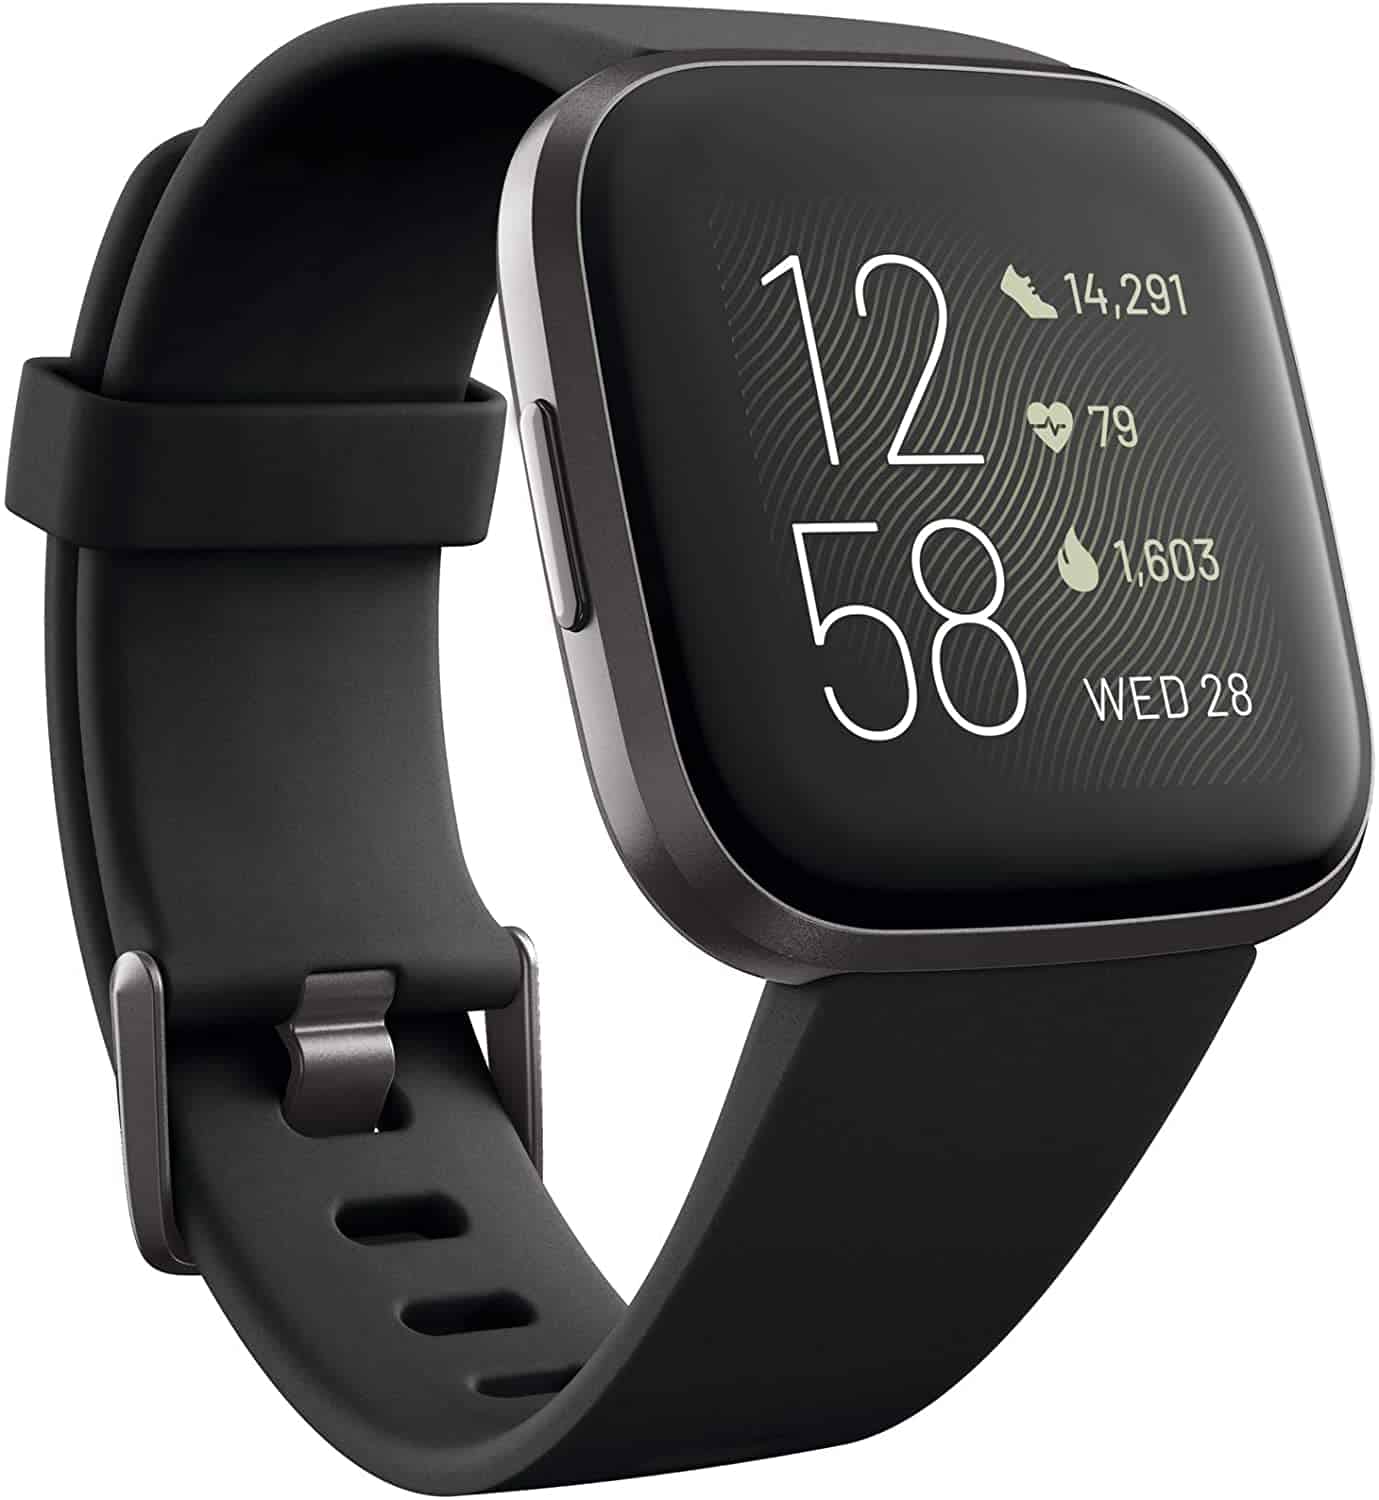 Black Fitbit Versa 2 with square screen